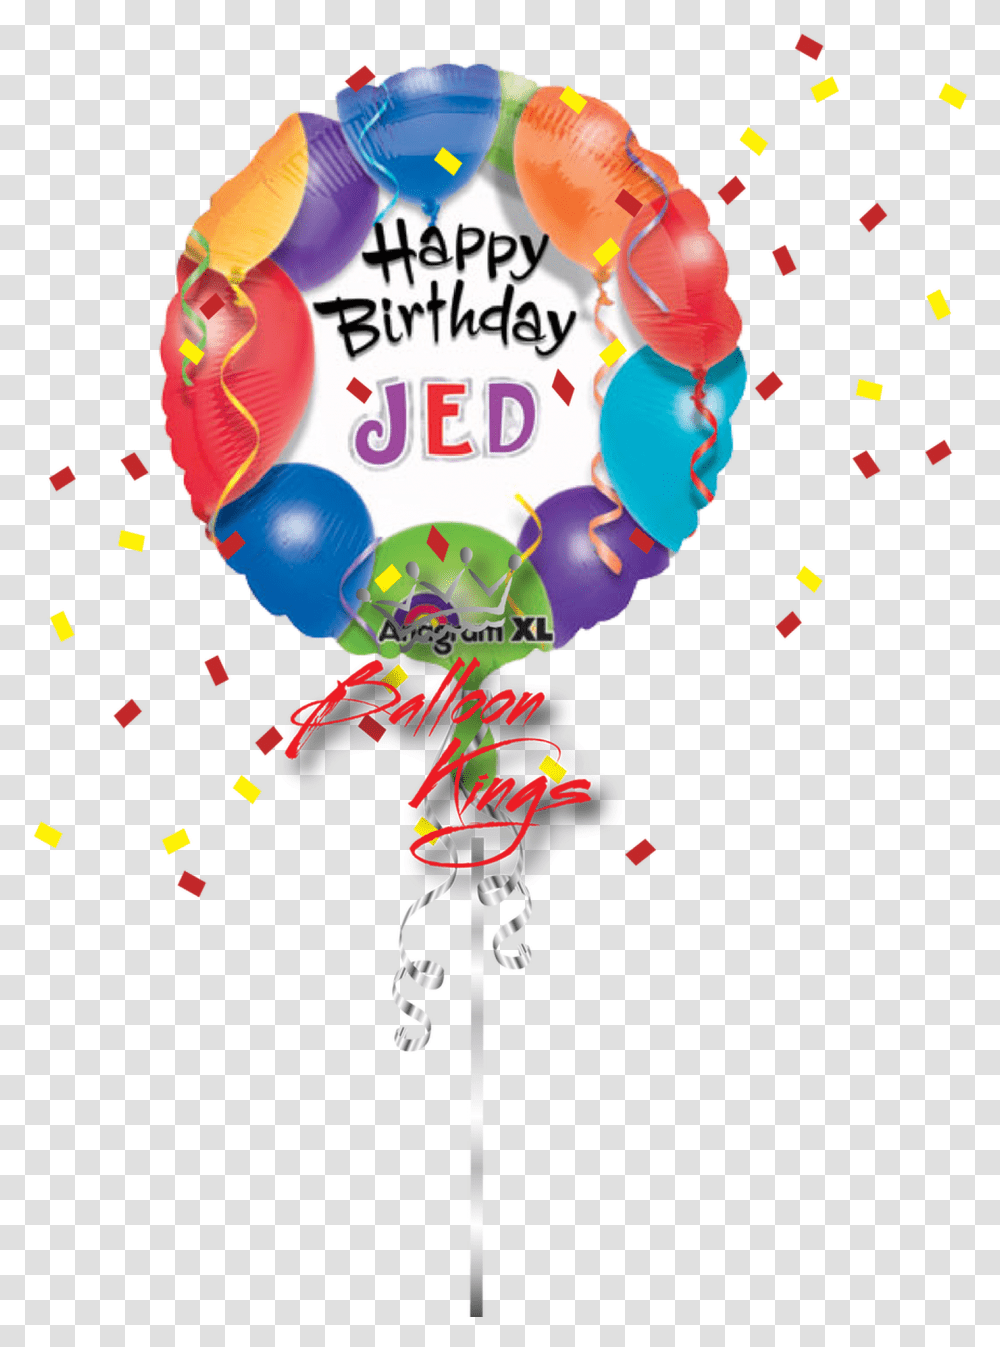 Happy Birthday Personalized Celebrate Happy Birthday Balloons, Paper, Confetti Transparent Png